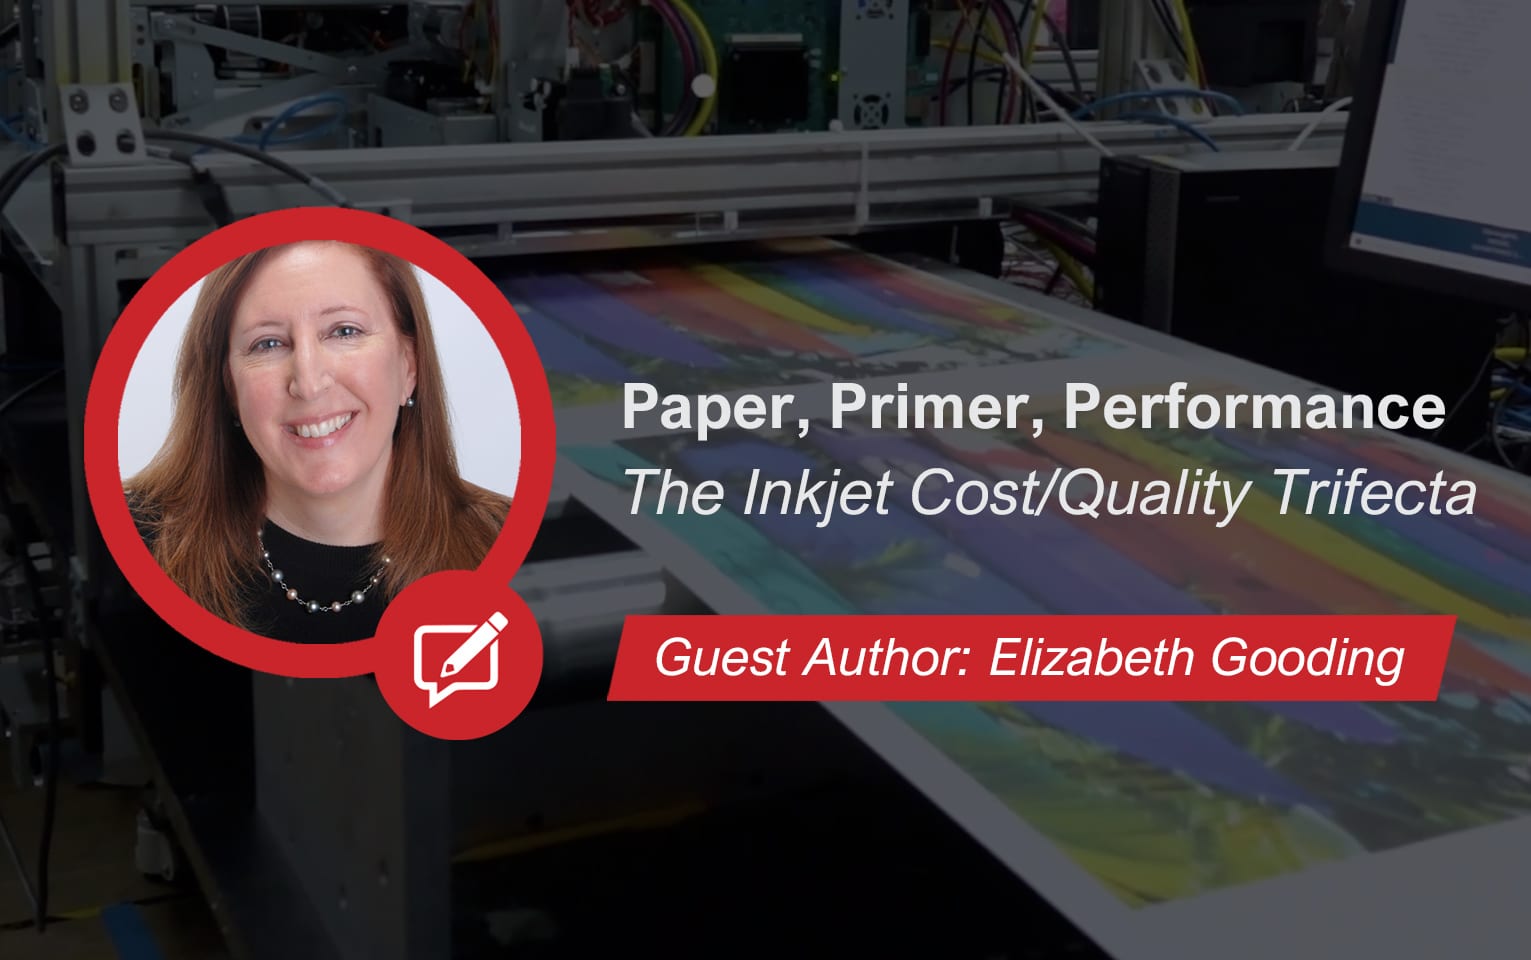 Paper. Primer. Performance. The Inkjet Cost/Quality Trifecta